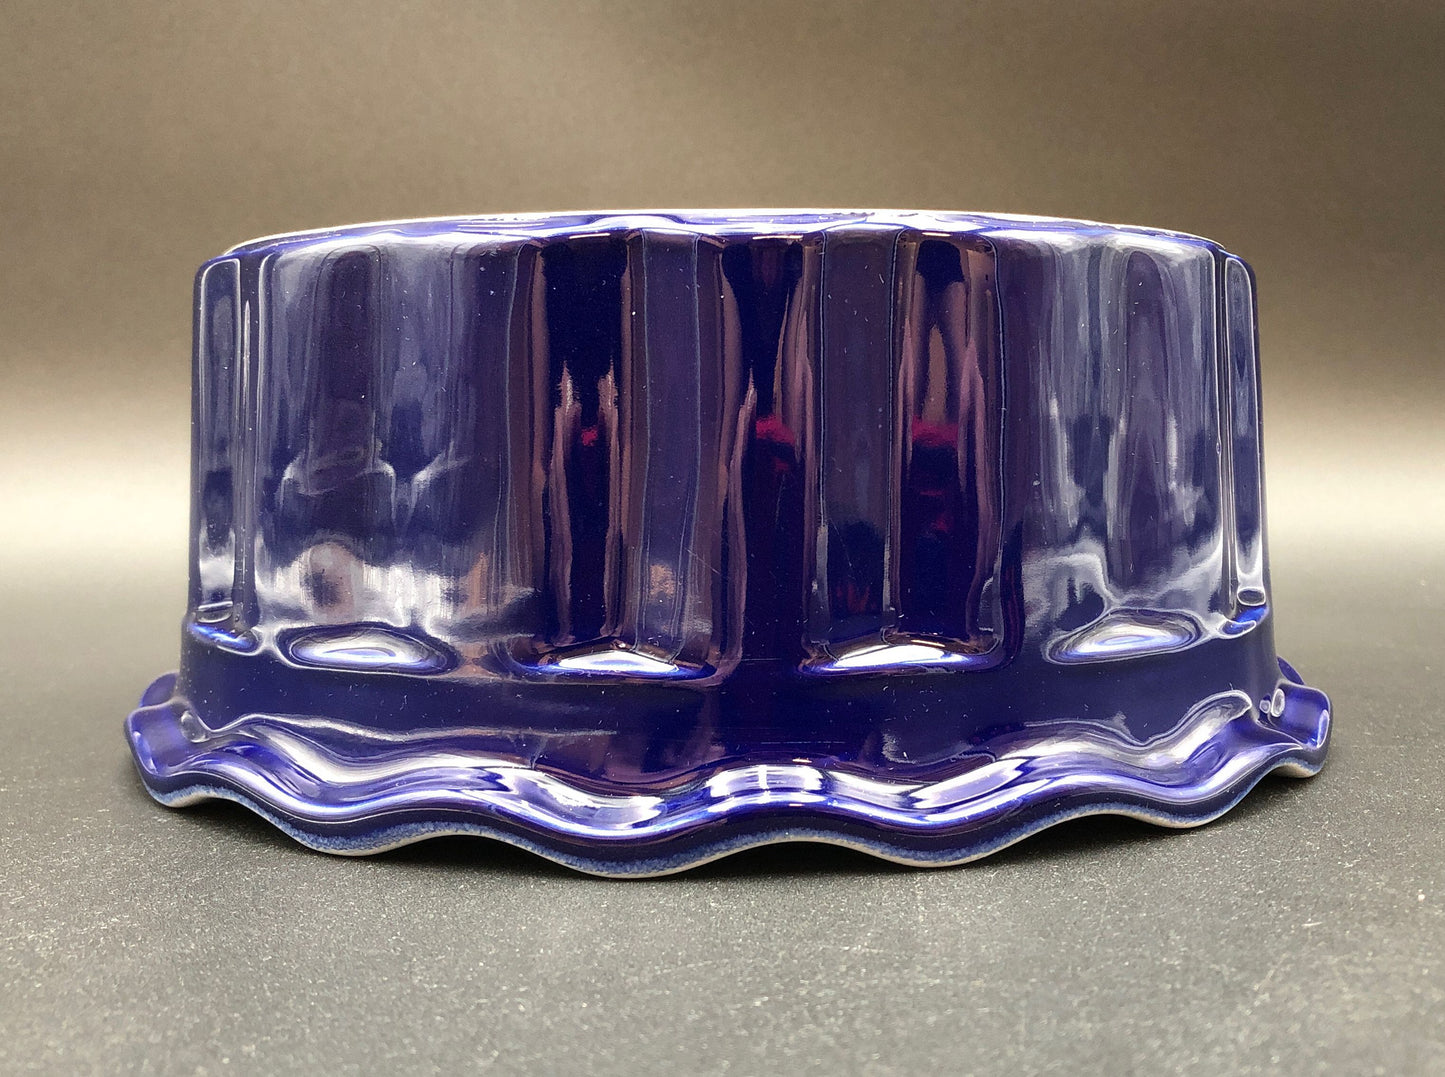 Emile Henry Blue Scalloped Casserole Baking Dish 8.75" - Made In France